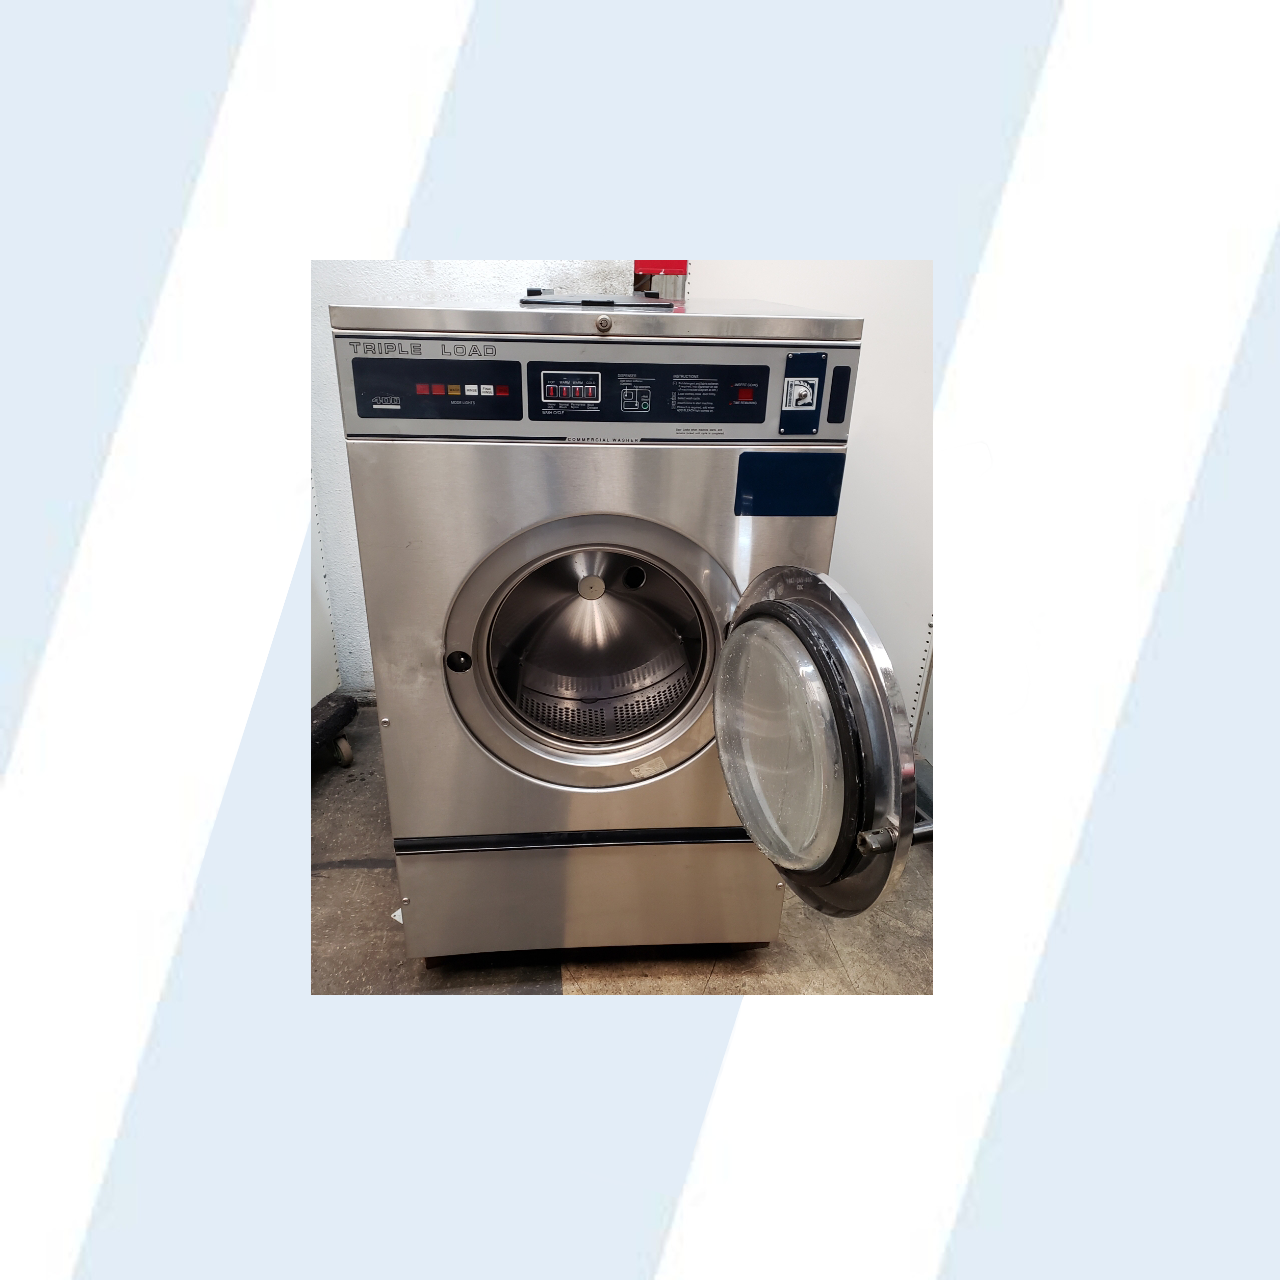 Dexter T400 WCN25AASS, 30lbs, Front Load Washer Serial No 2000200432023[REF] - $2,475.00